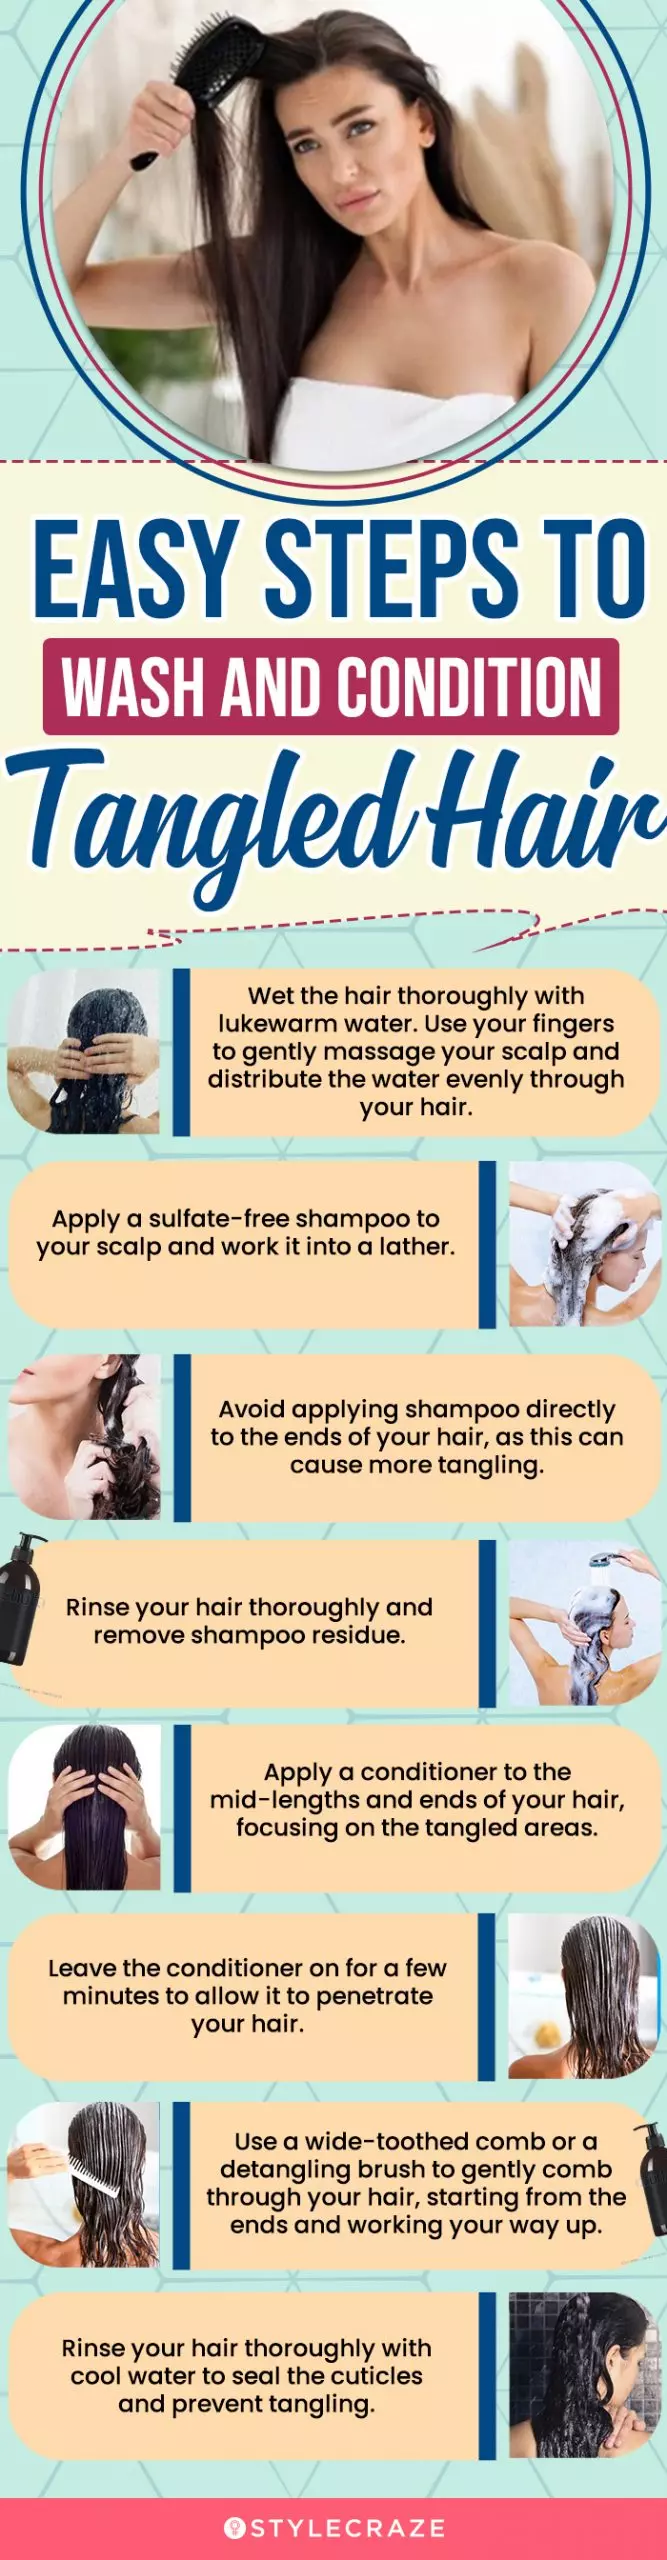 Easy Steps To Wash And Condition Tangled Hair (infographic)